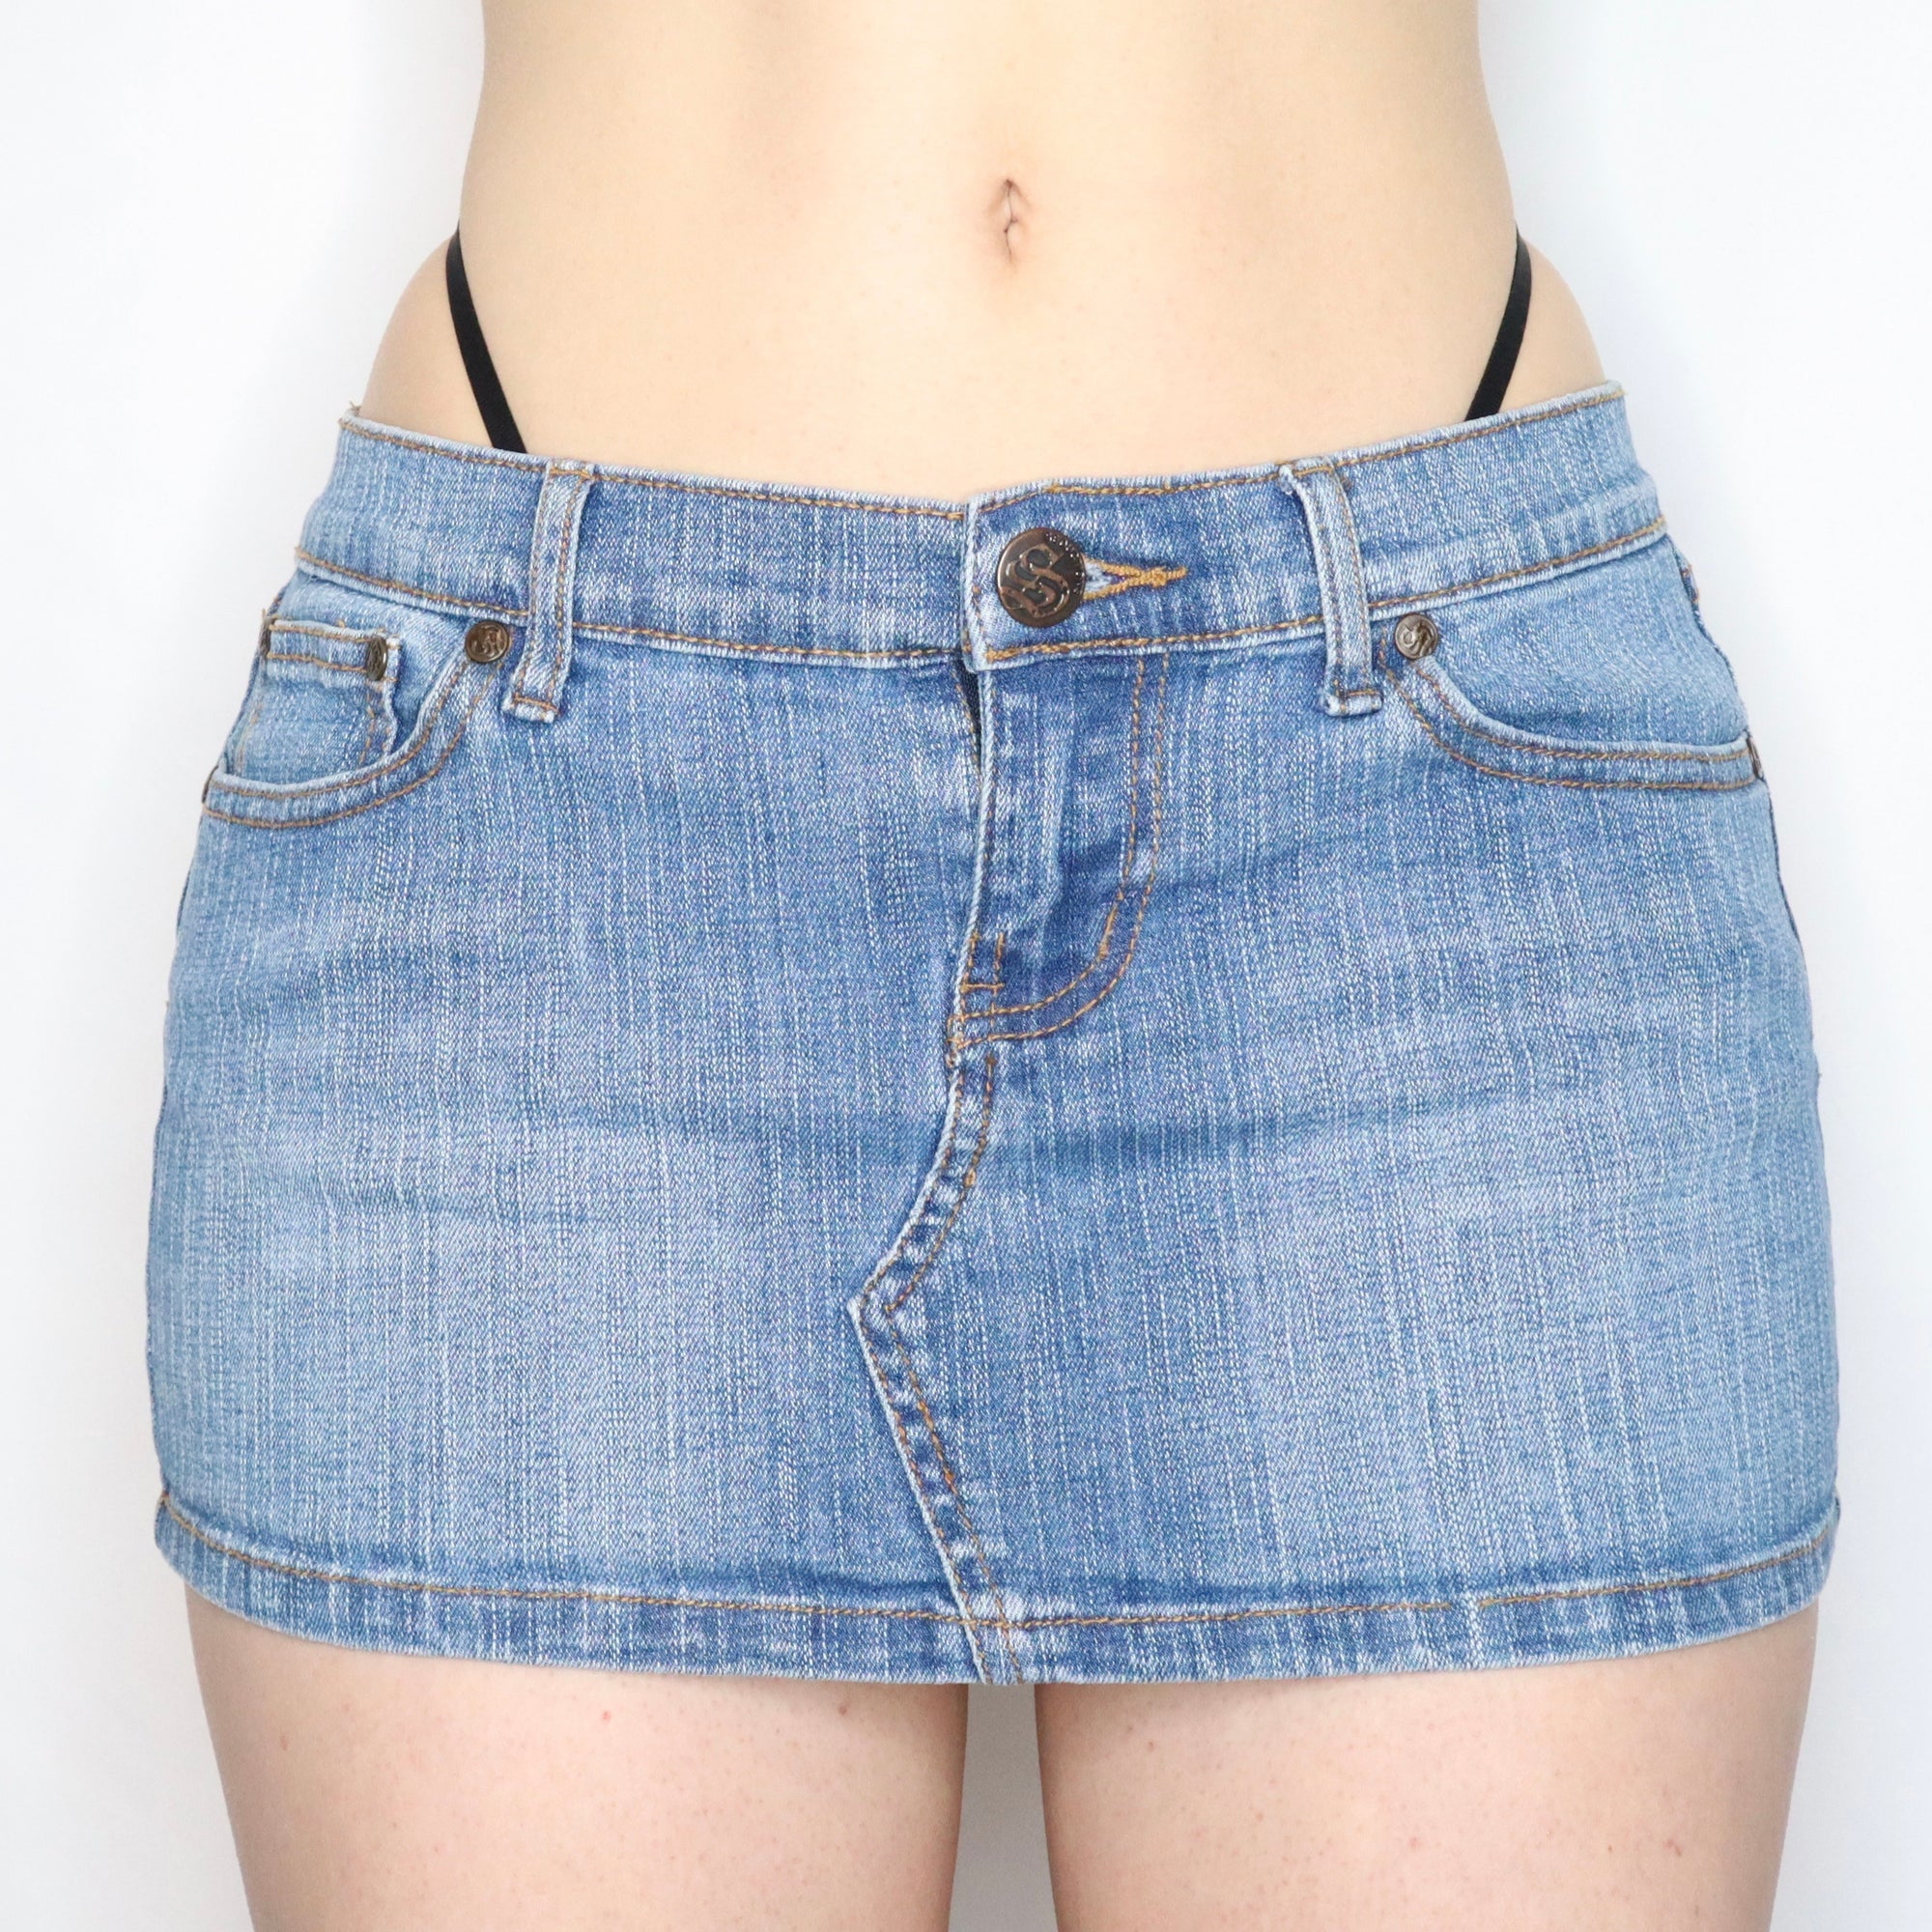 Early 2000s Low Rise Stretchy Denim Mini Skirt